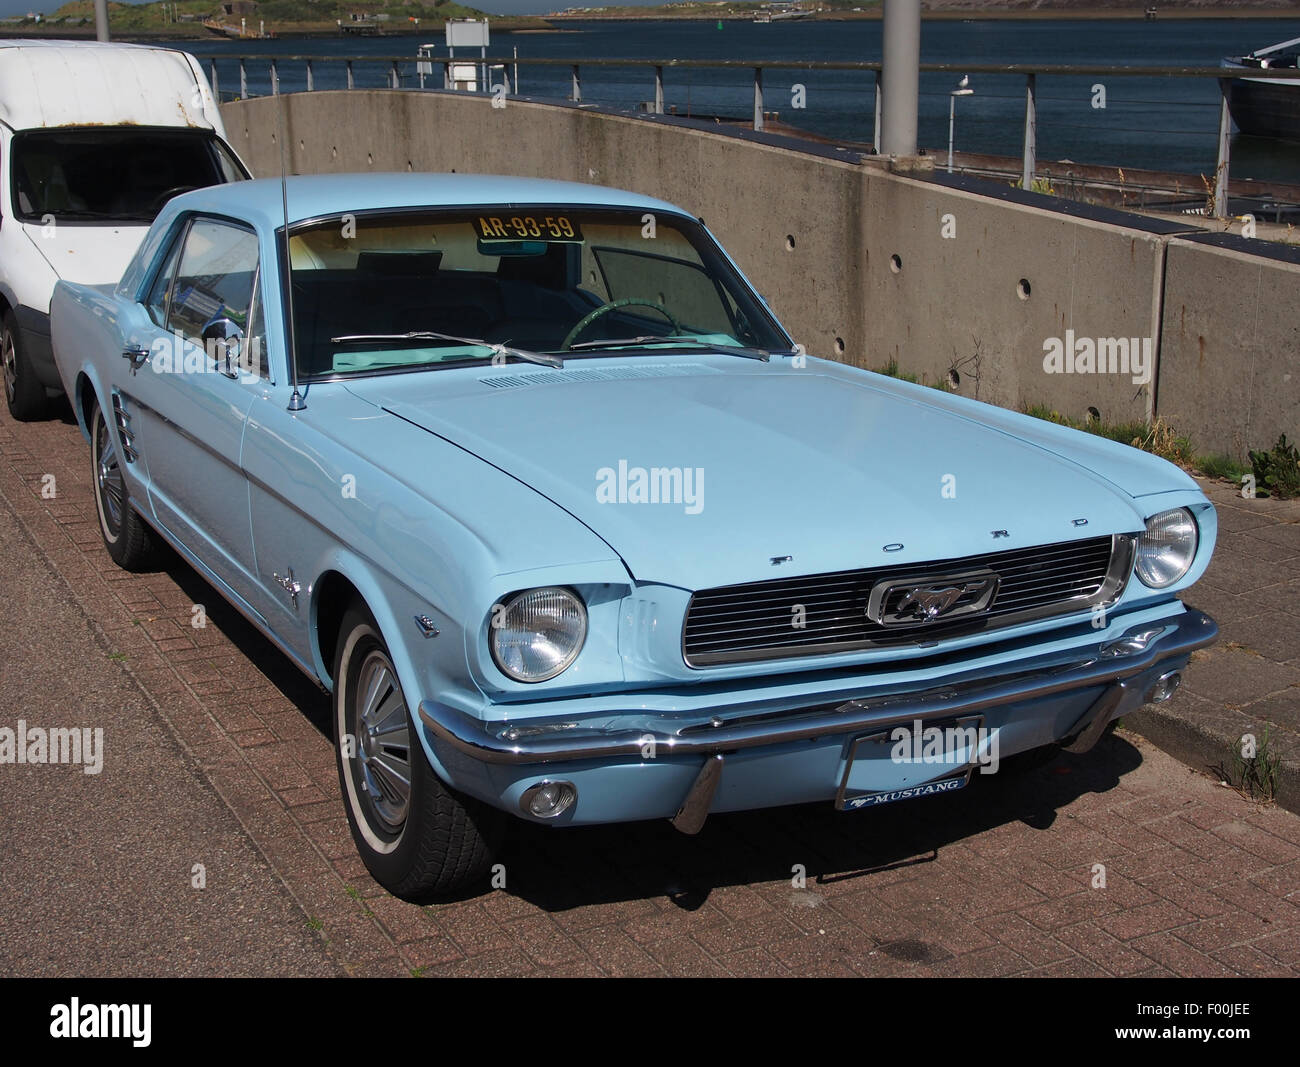 1966 Ford Mustang light blue, pic2 Stock Photo